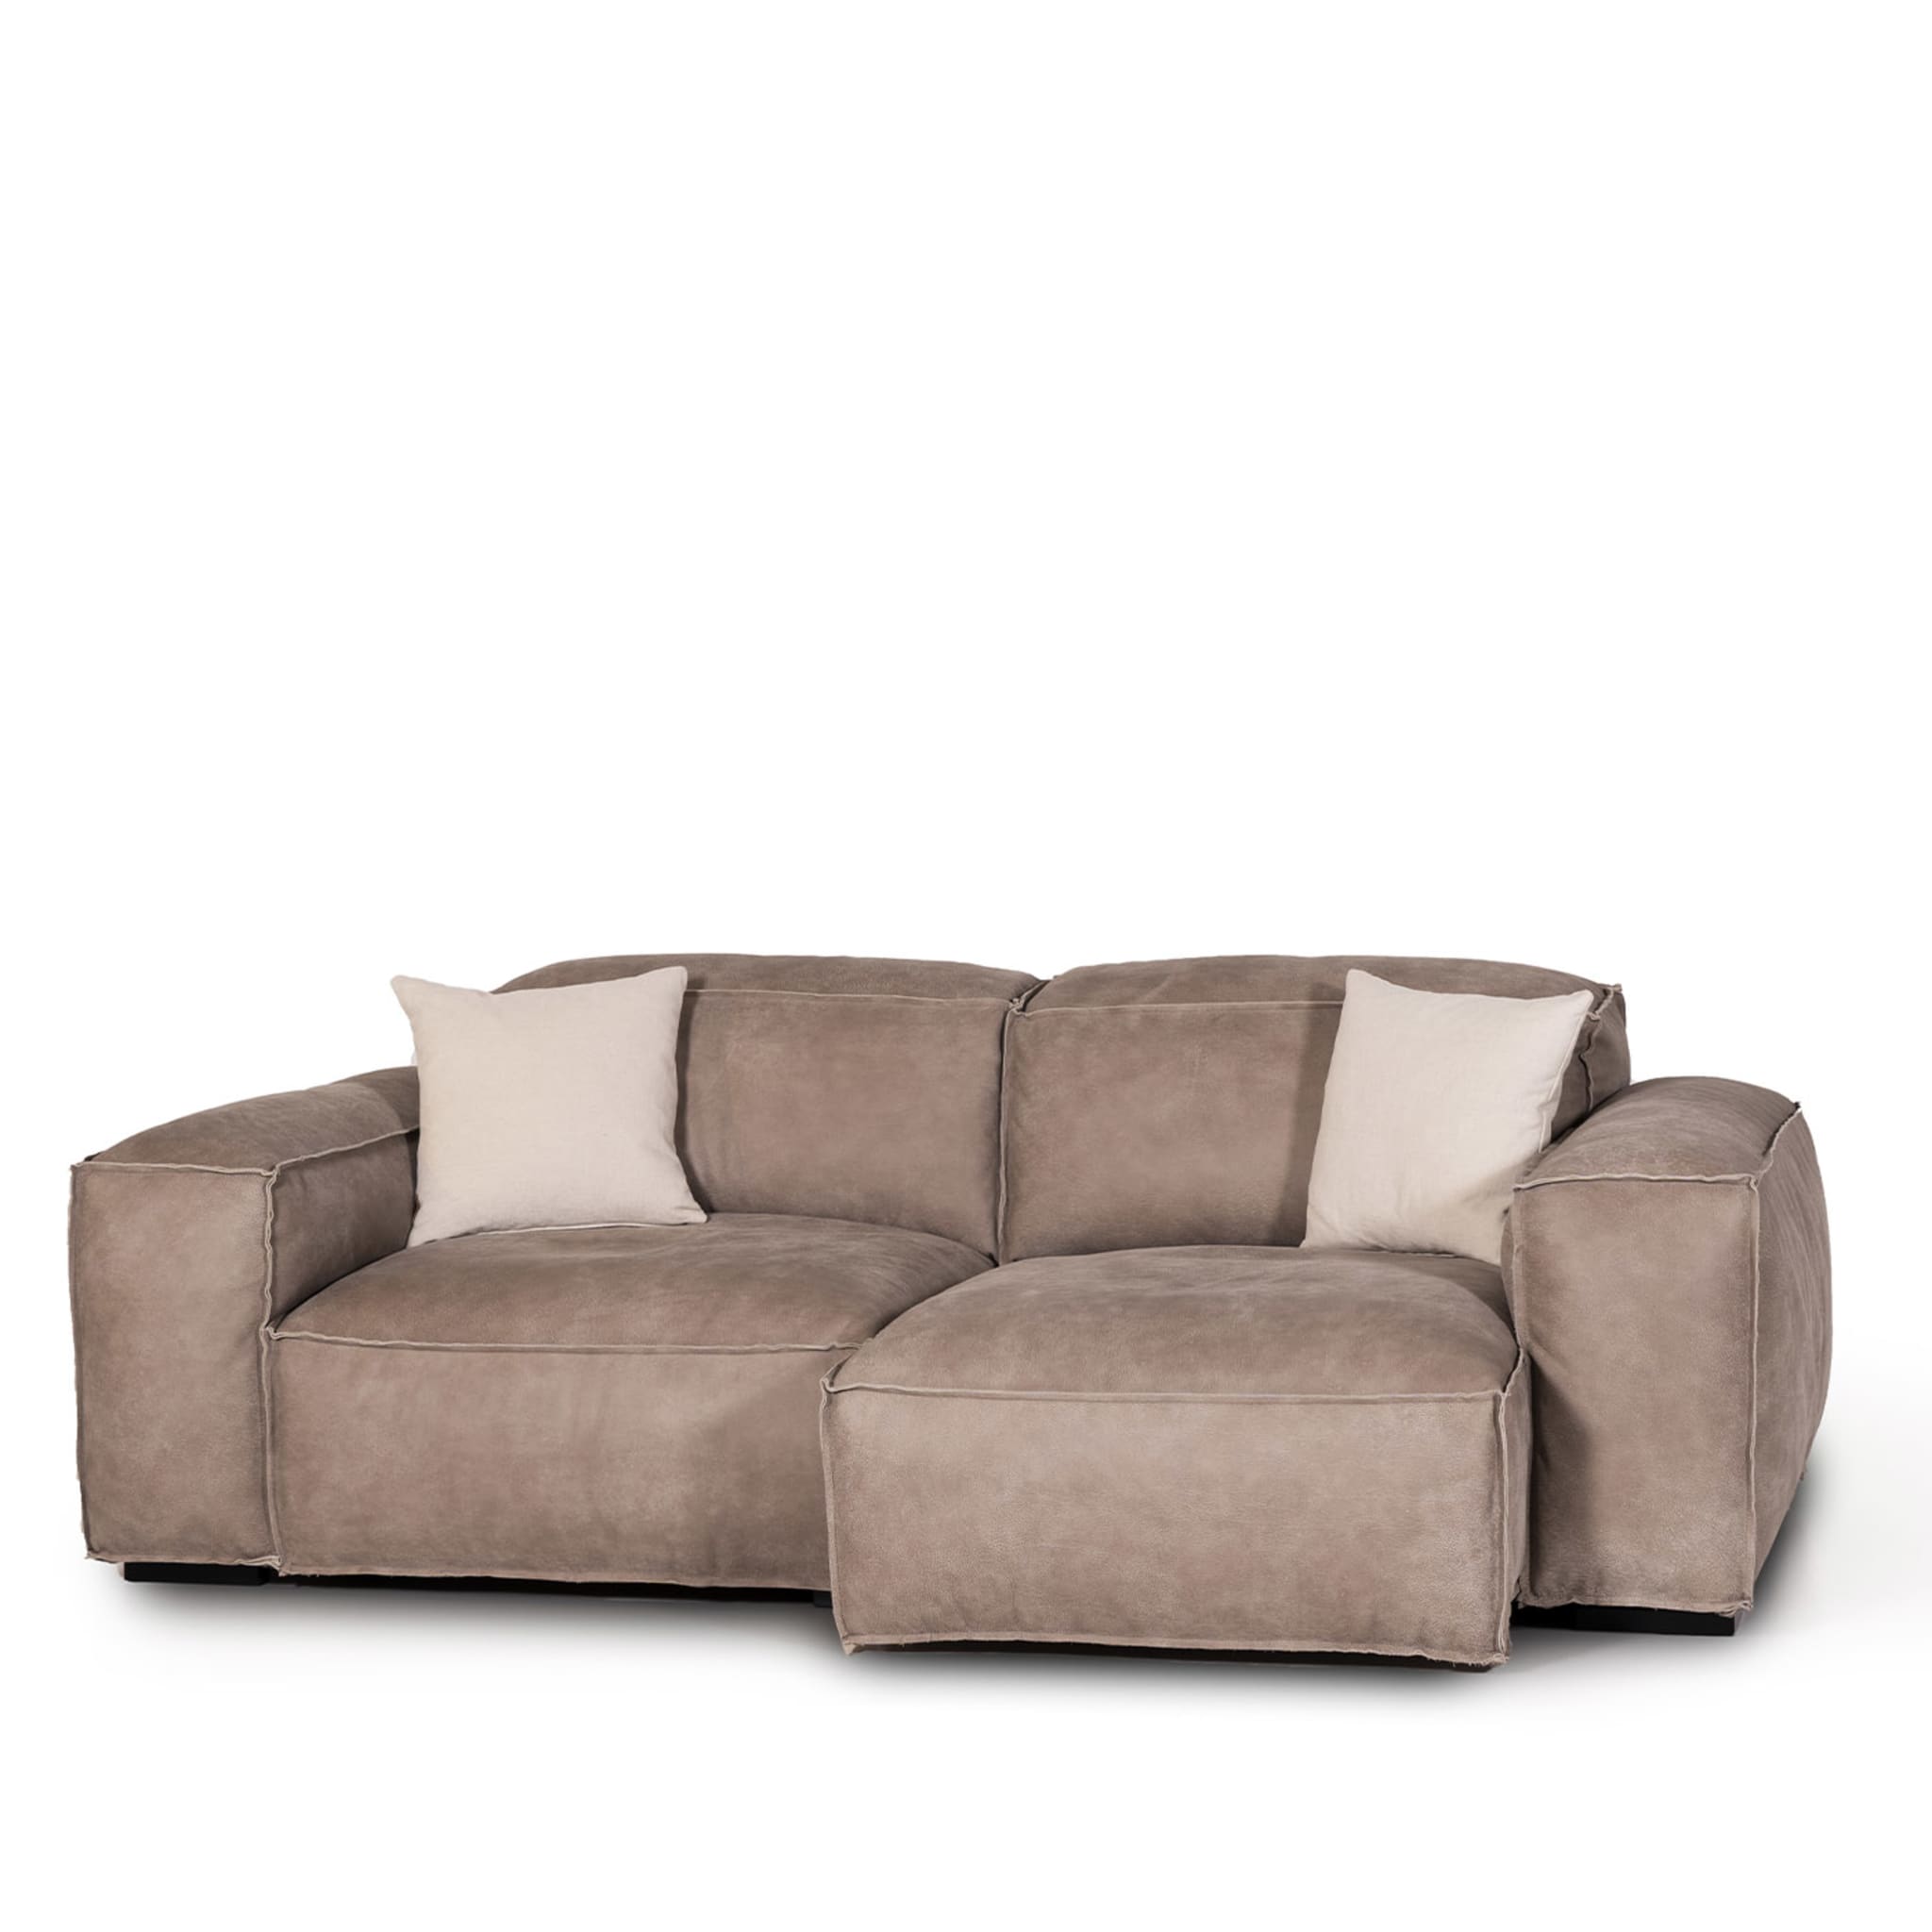 Placido 2 Seater Sofa in Gray Leather  - Alternative view 1